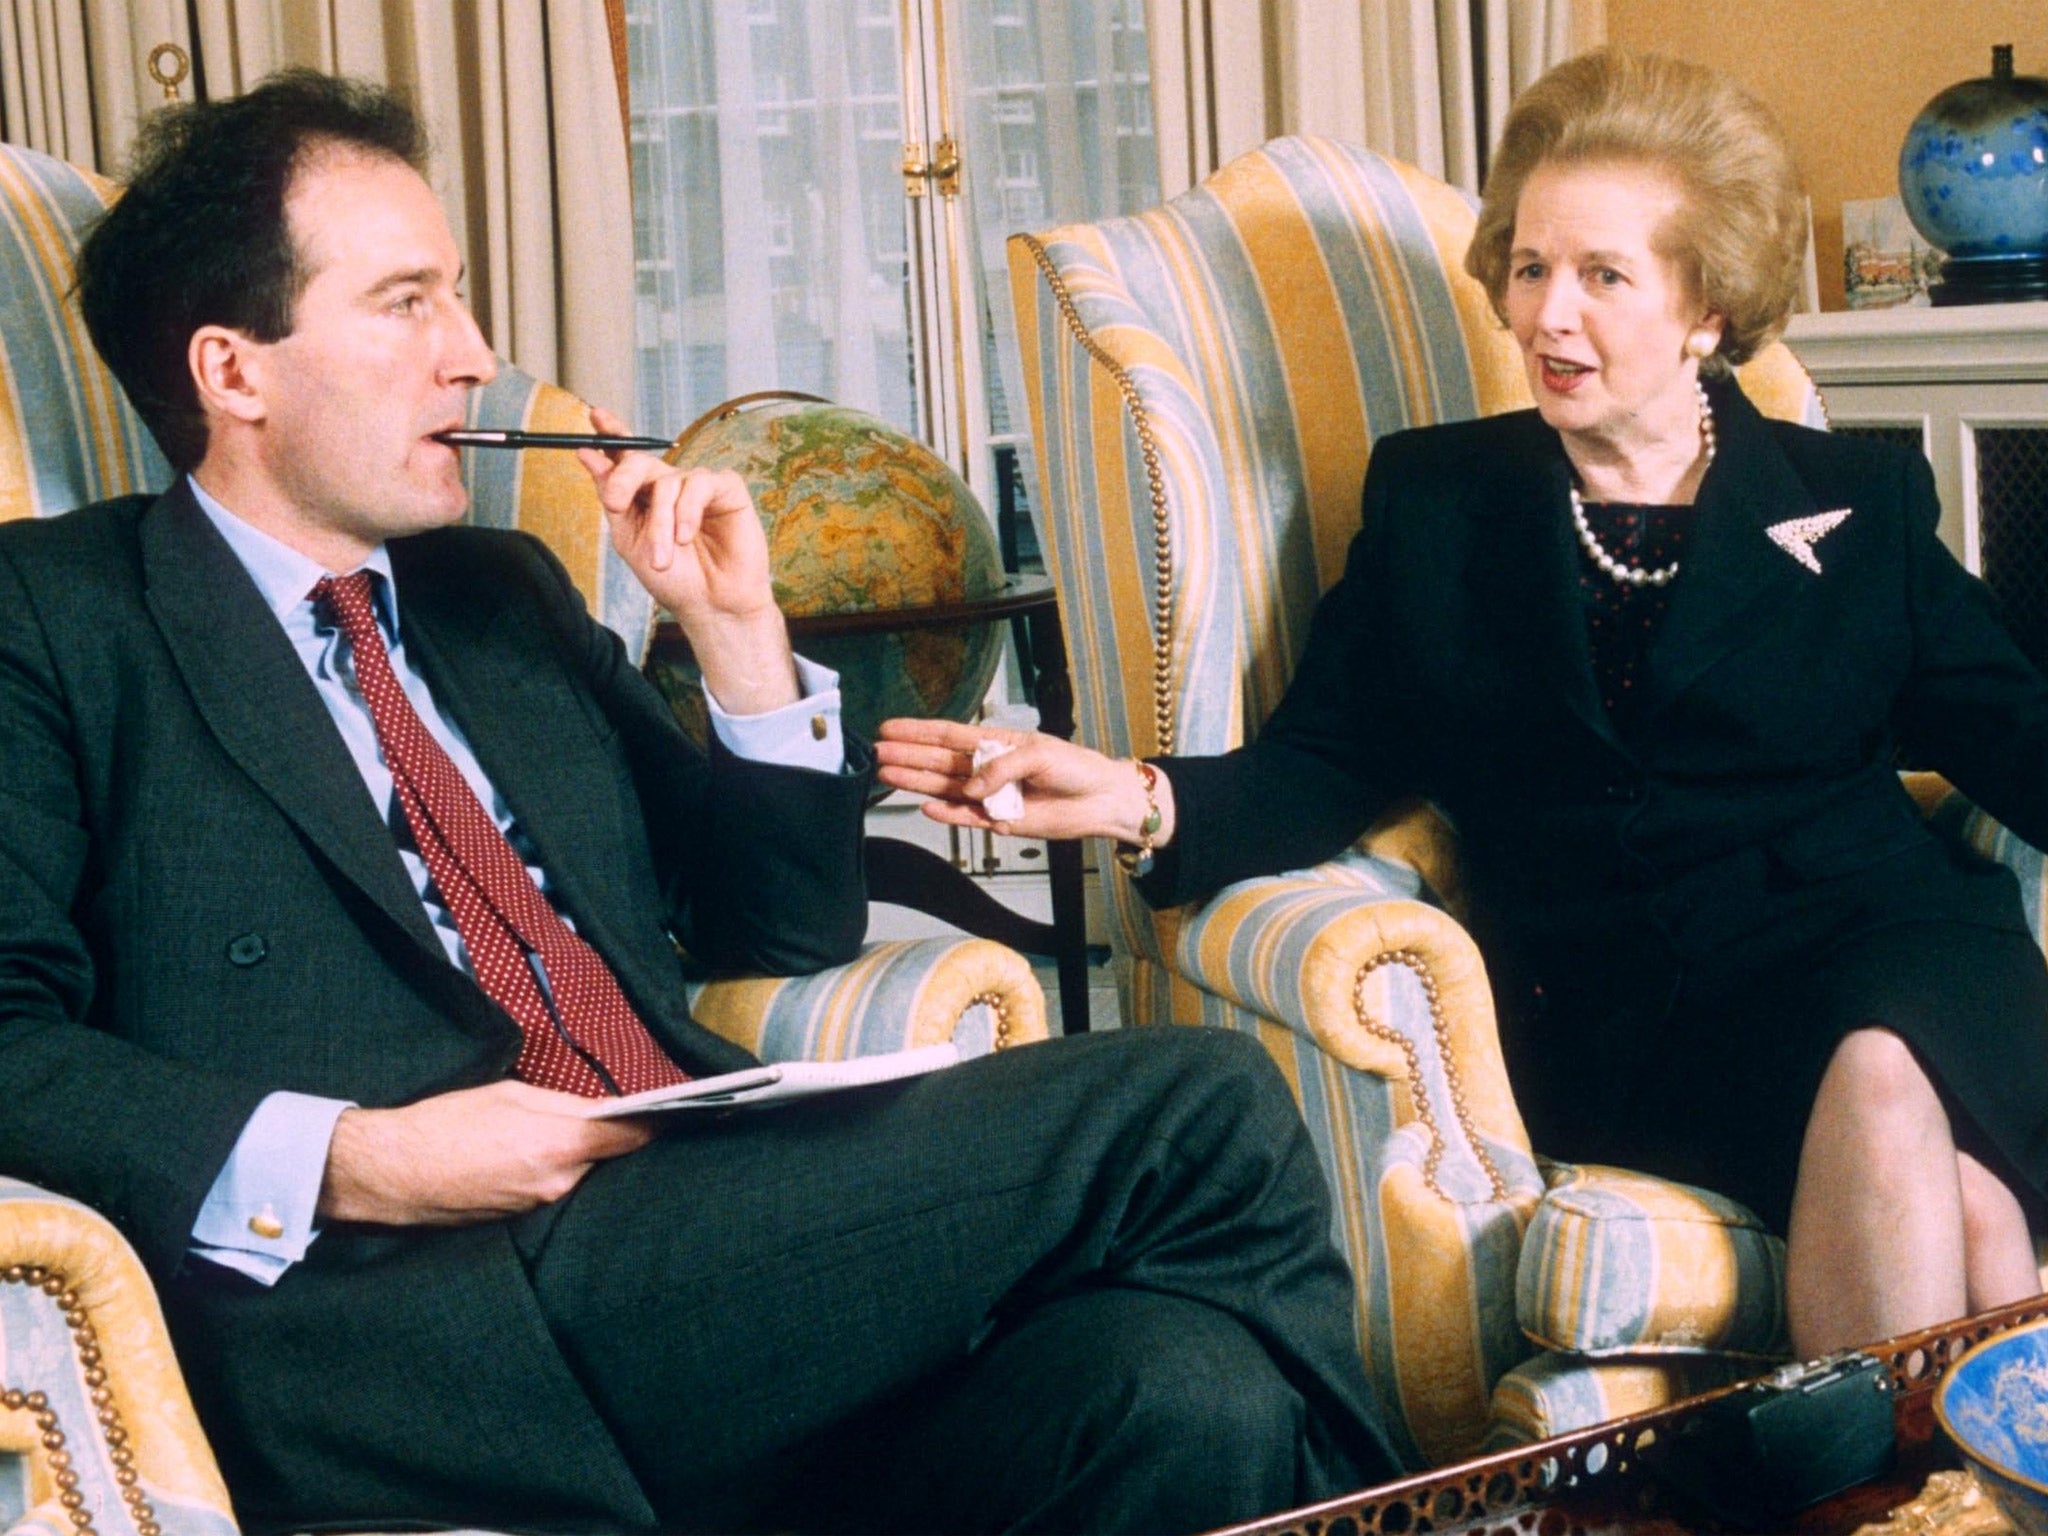 Margaret Thatcher with her biographer Charles Moore in 1995